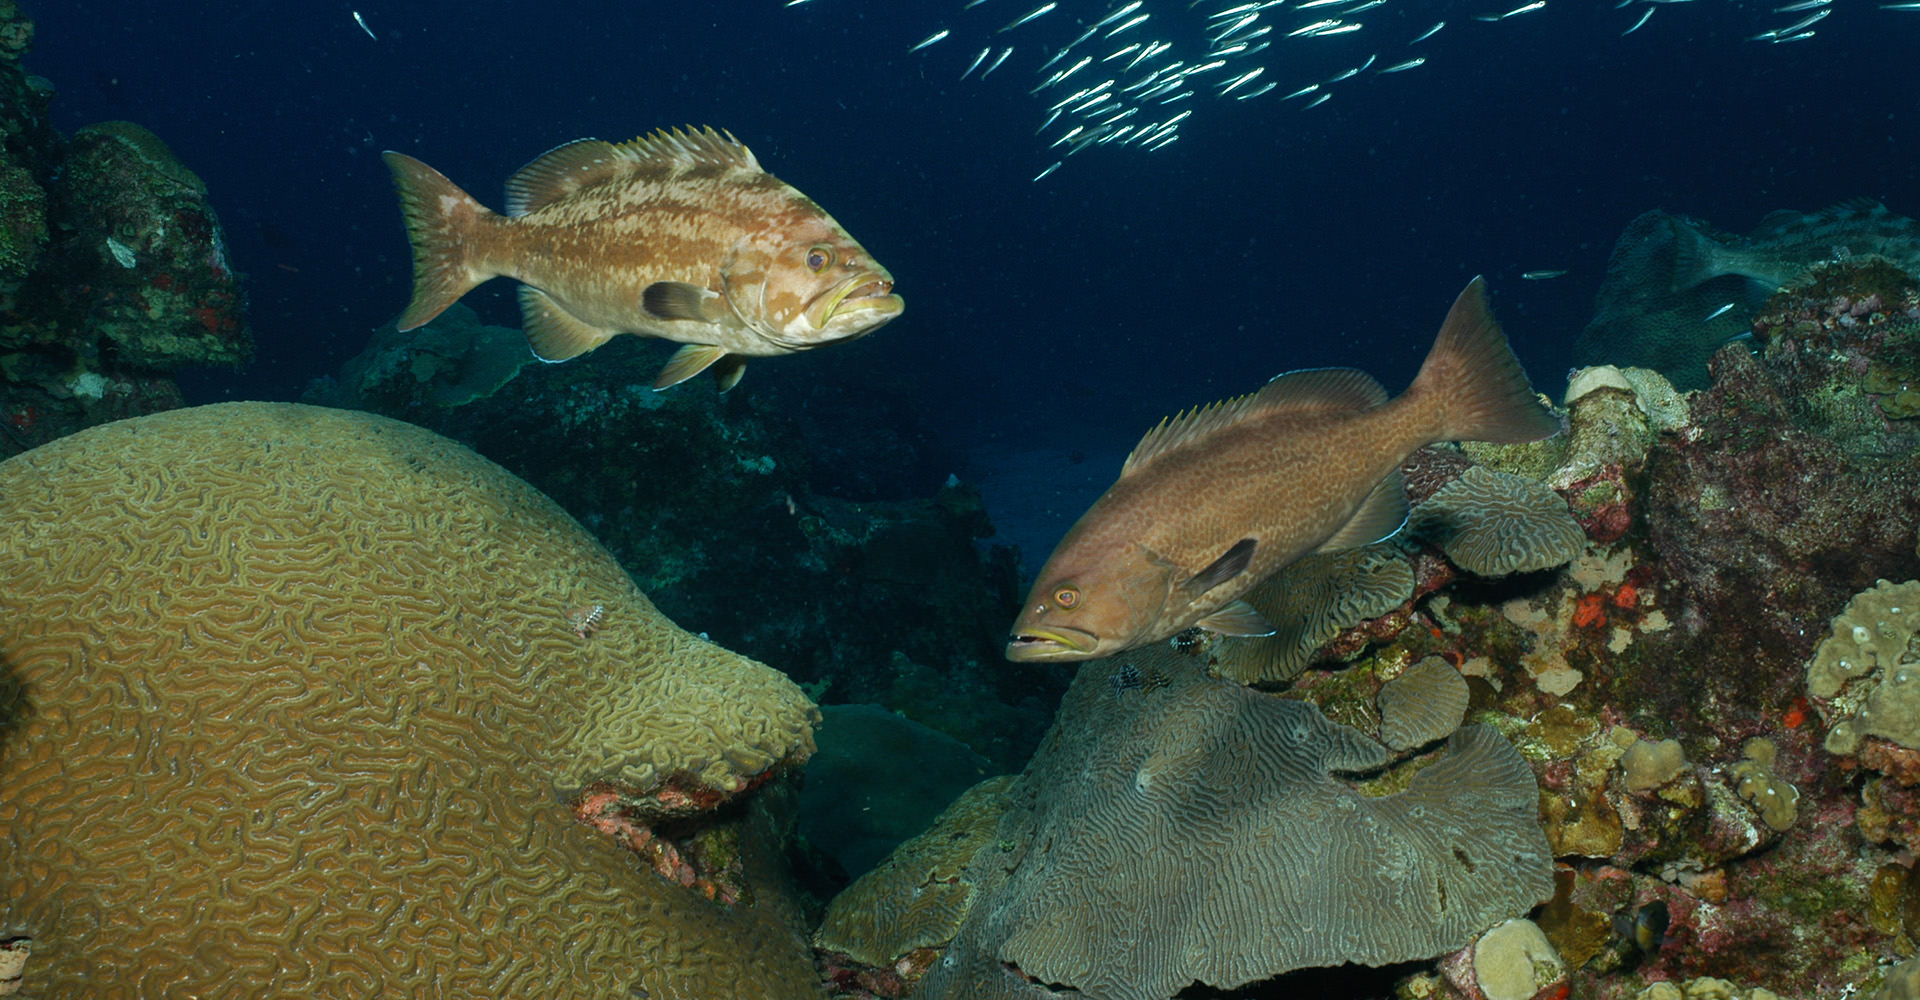 Two yellowmouth groupers facing each other on the reef